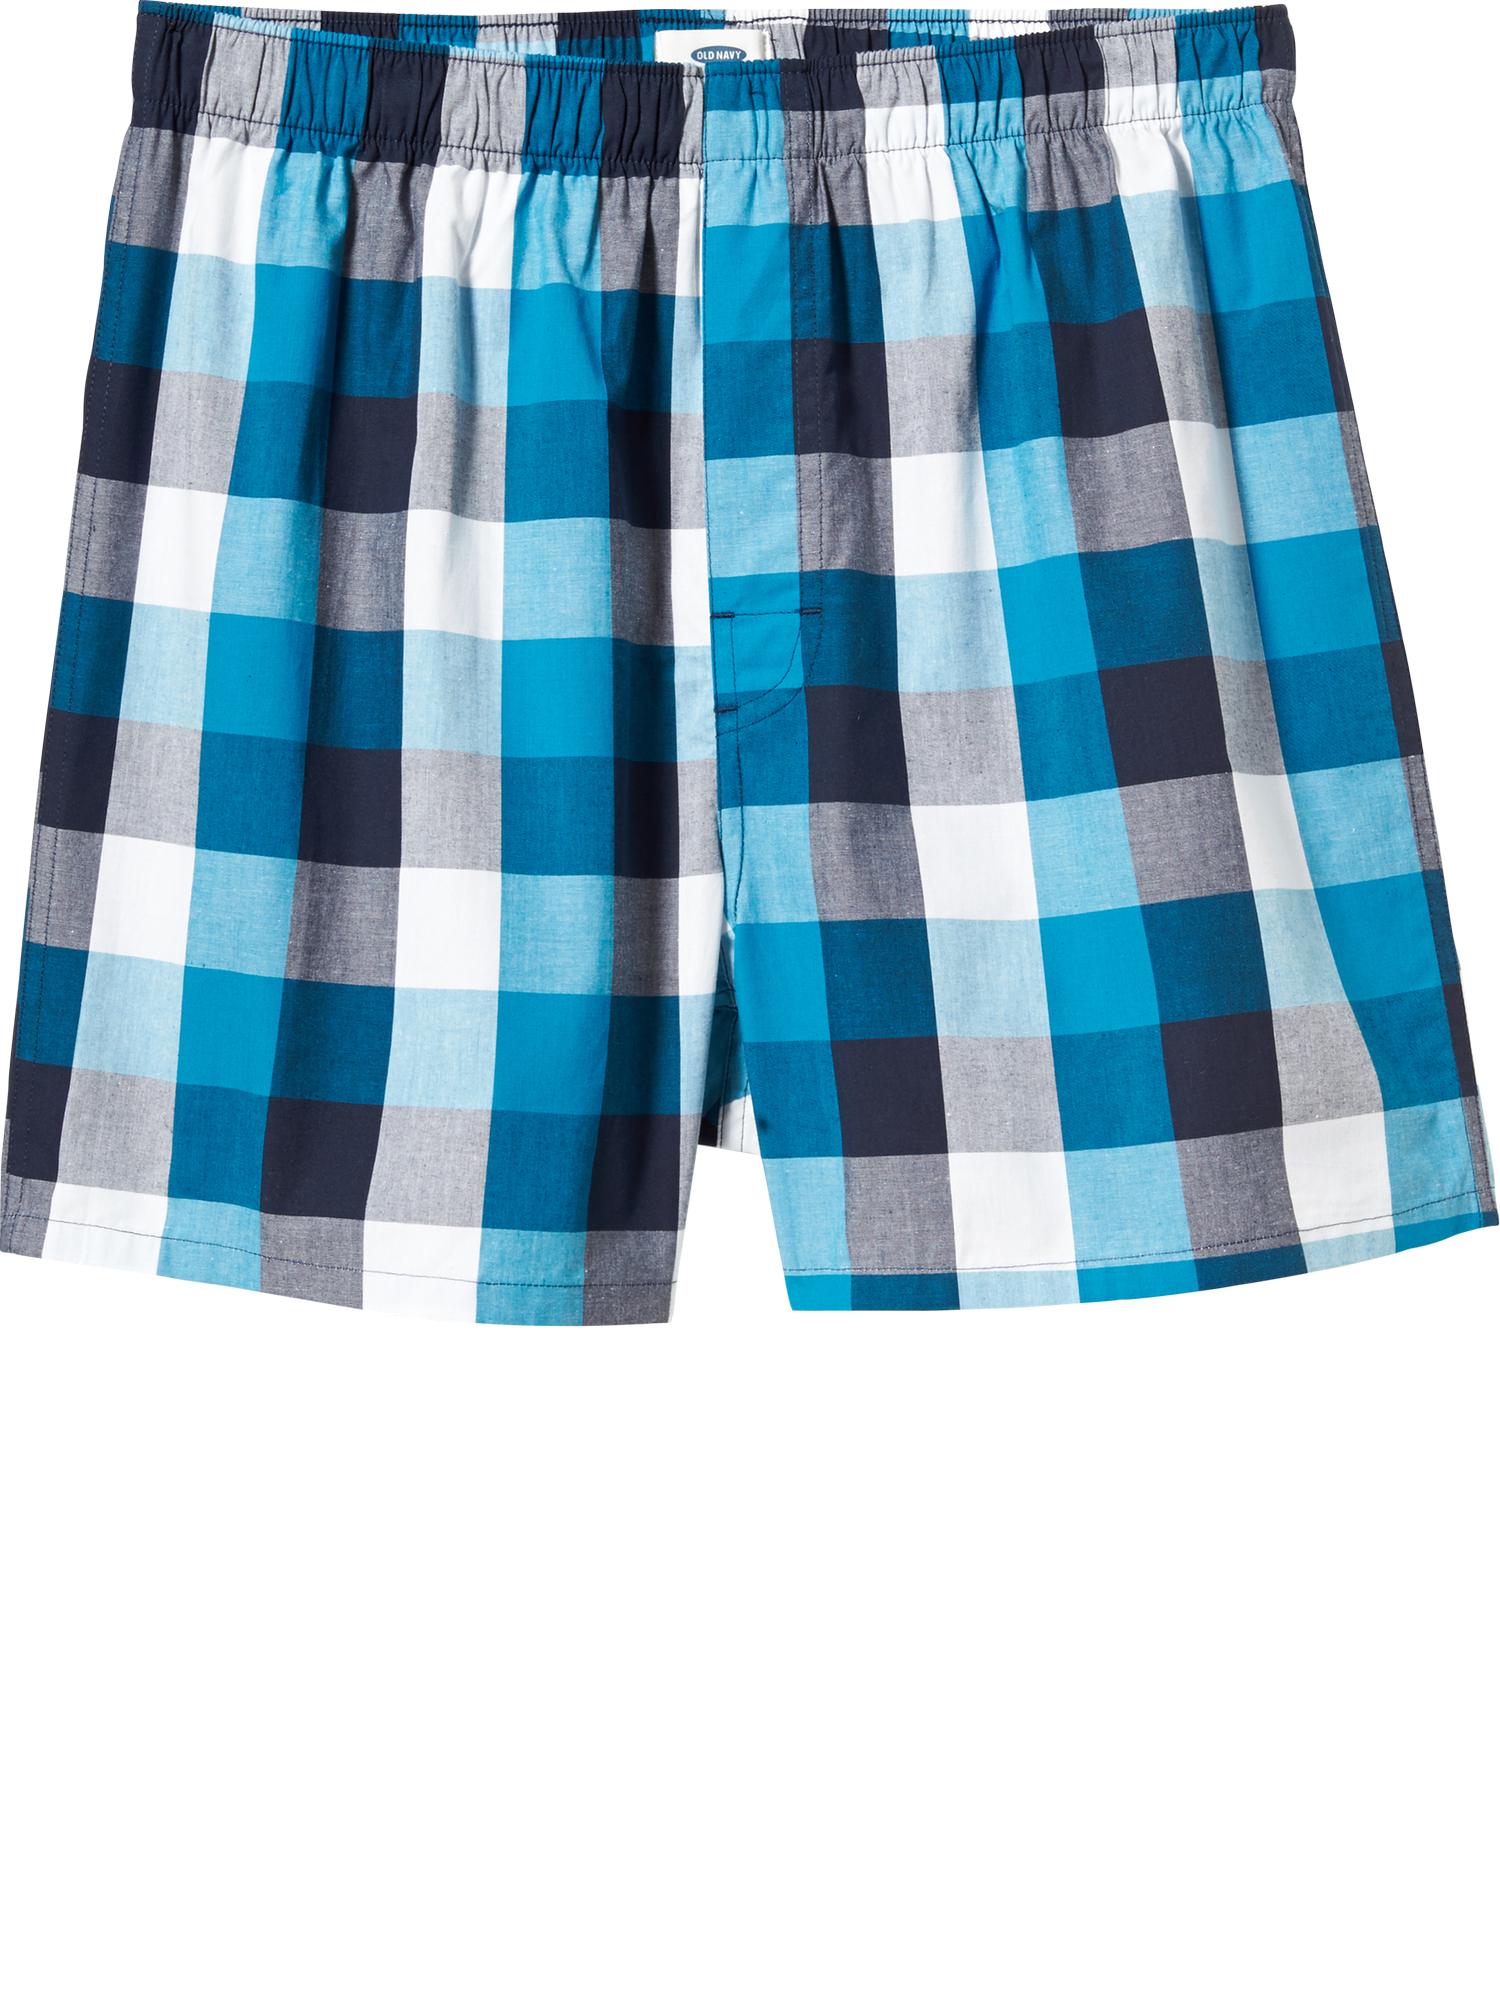 Men's Patterned Boxers | Old Navy